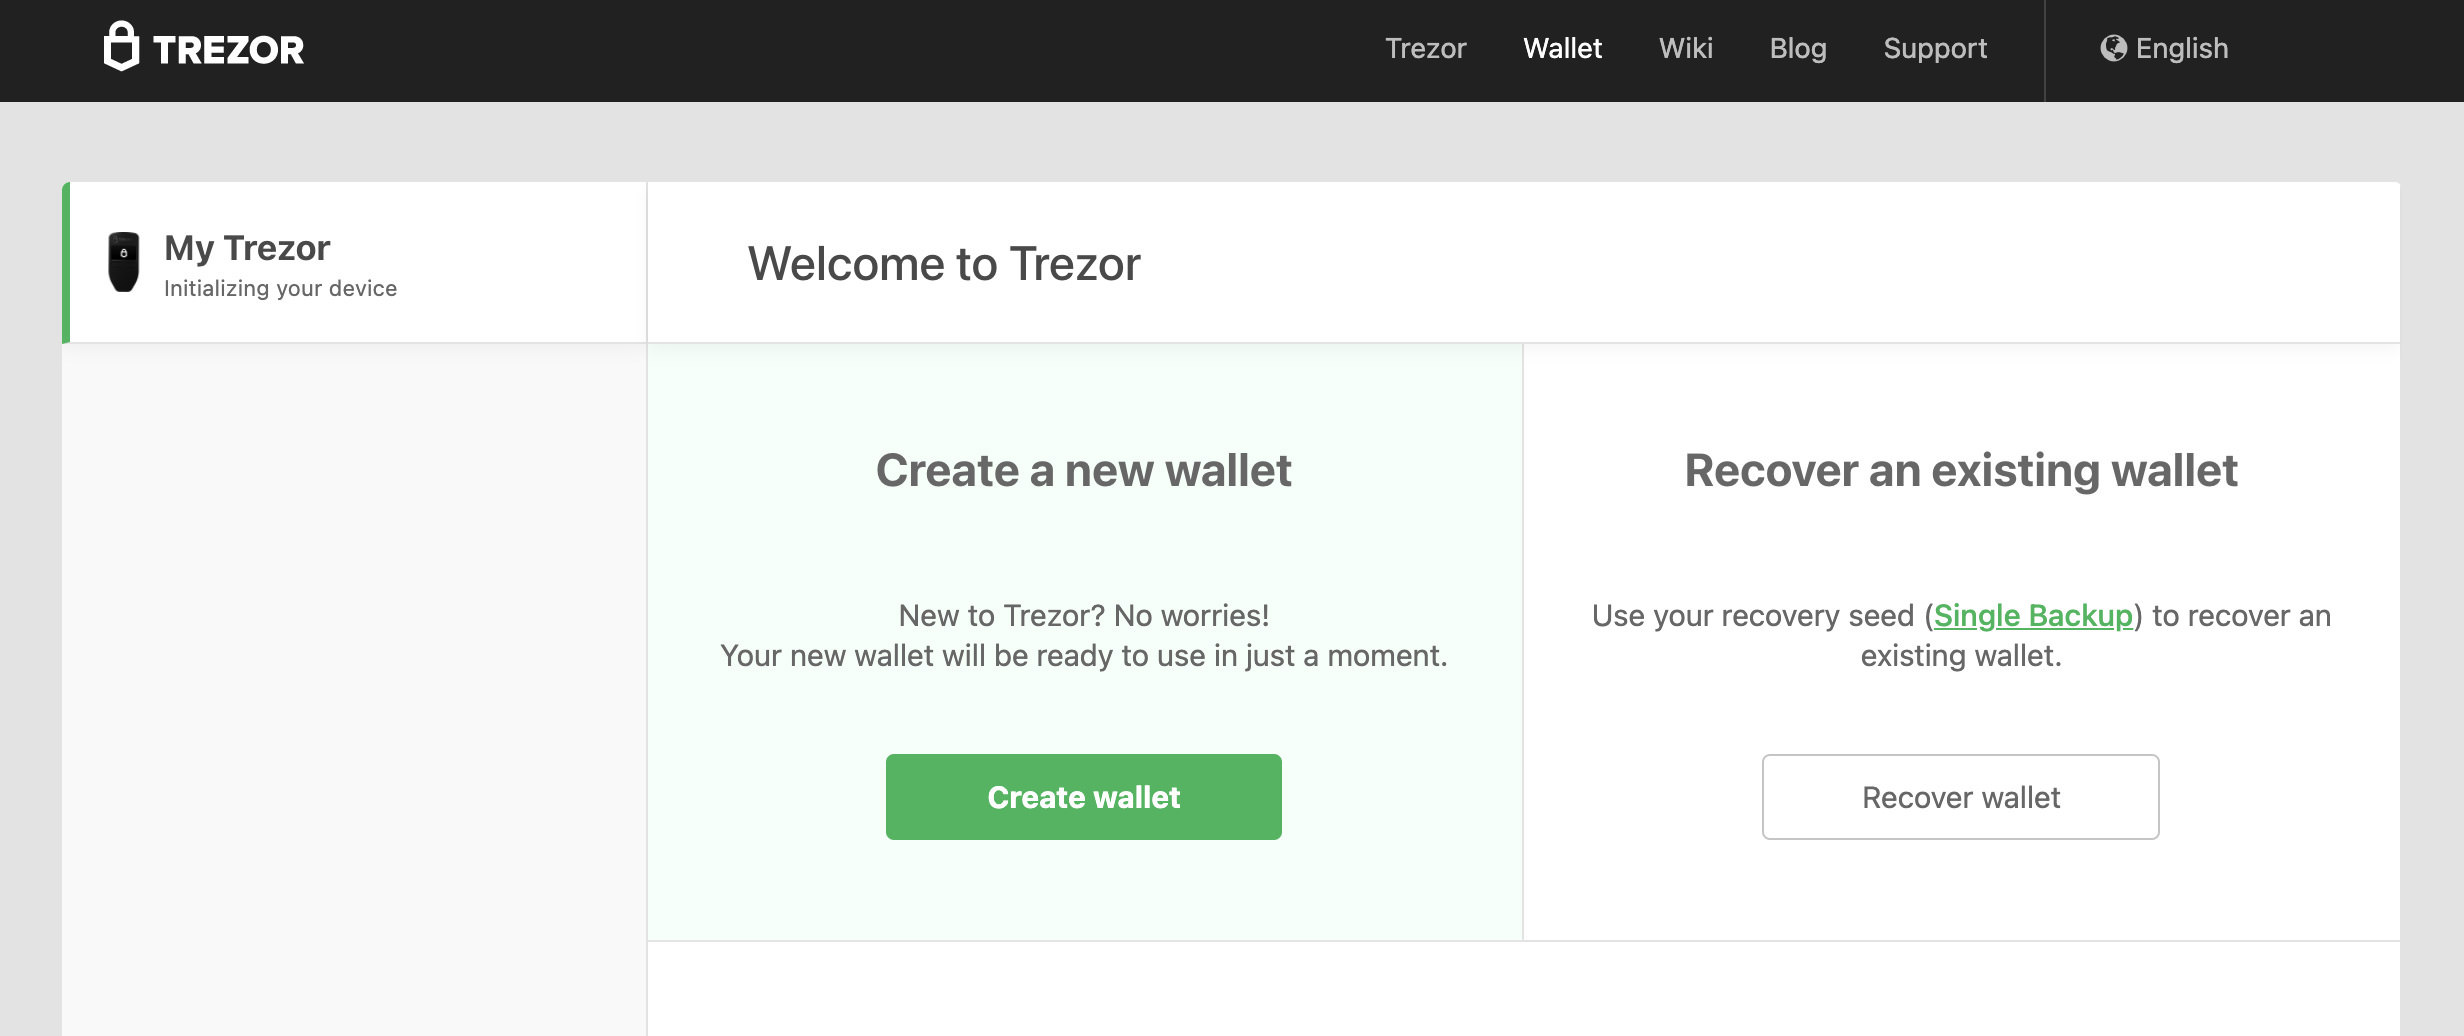 How to Reset & Restore Trezor Wallet Using Recovery Seed – DollarSince: Crypto Assets Know-How